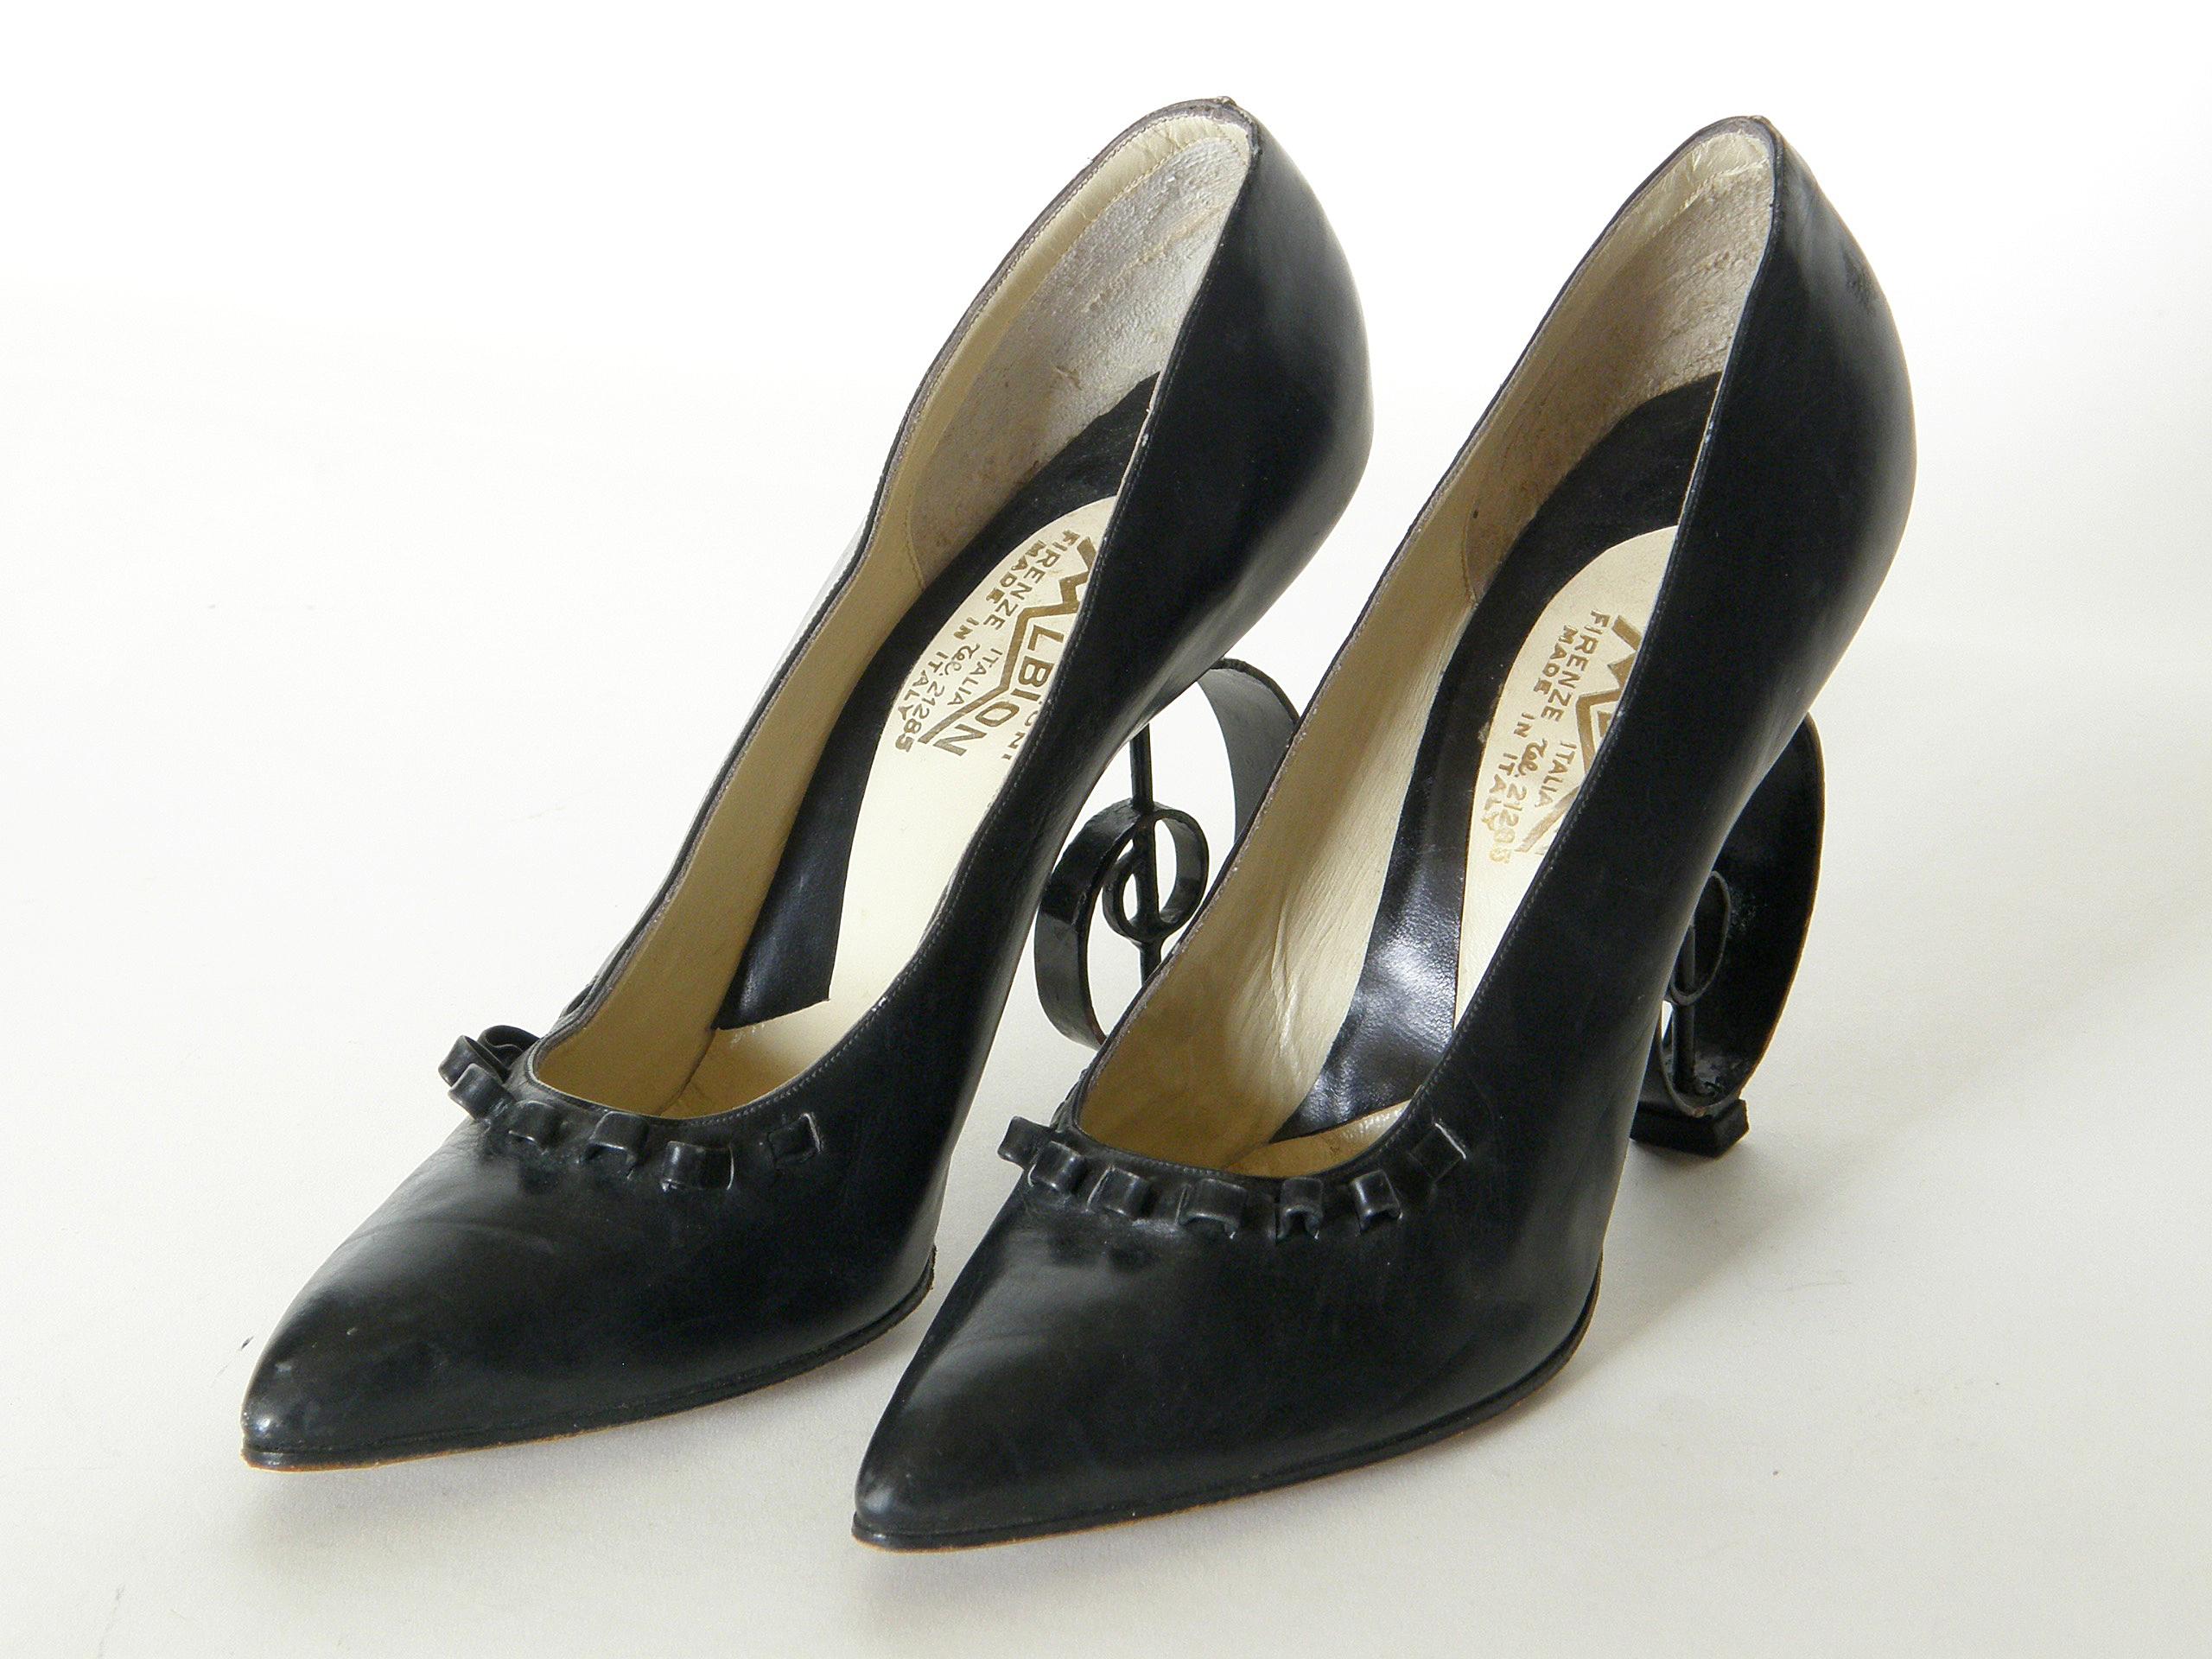 These fantastical Italian leather pumps are a feat of engineering. The unique heels are designed as three-dimensional G-clefs (or treble clefs), and the vamp has a playful strip of leather that laces through slits and undulates along the edge.